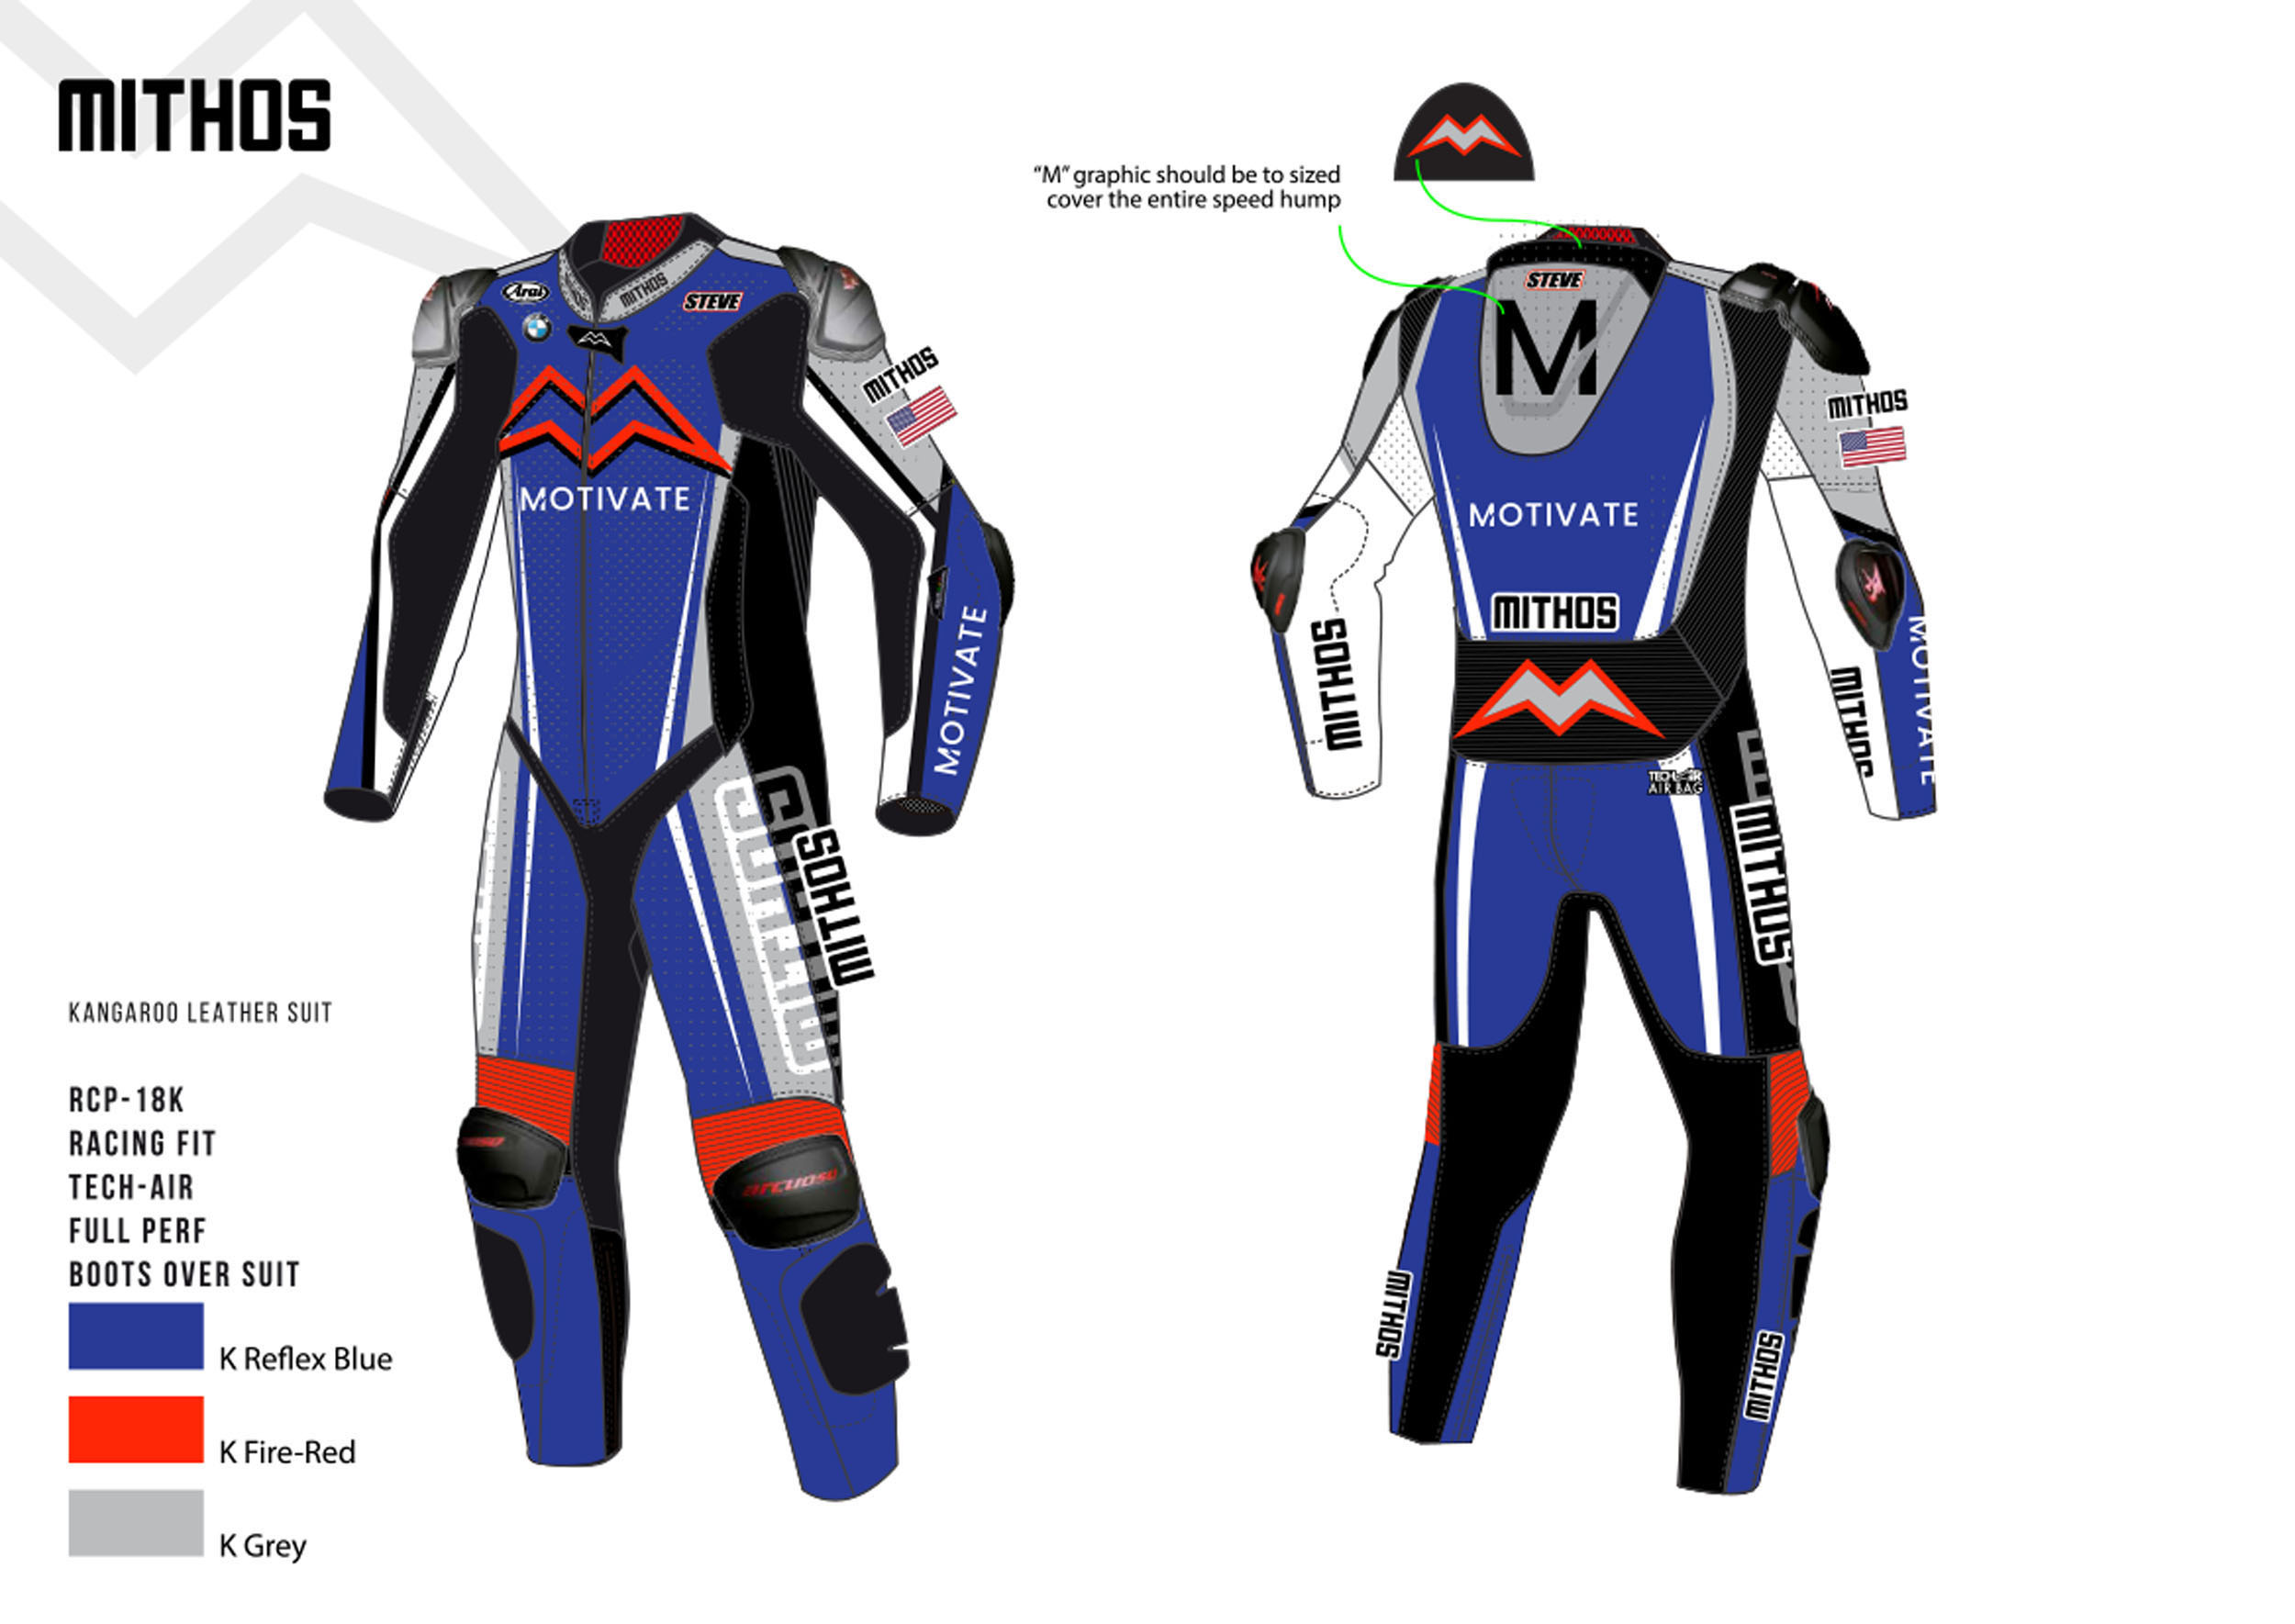 Mithos Kangaroo Leather Suit: RCP-18K, Racing Fit, Tech-Air, Full Perf, Boots Over Suit Design